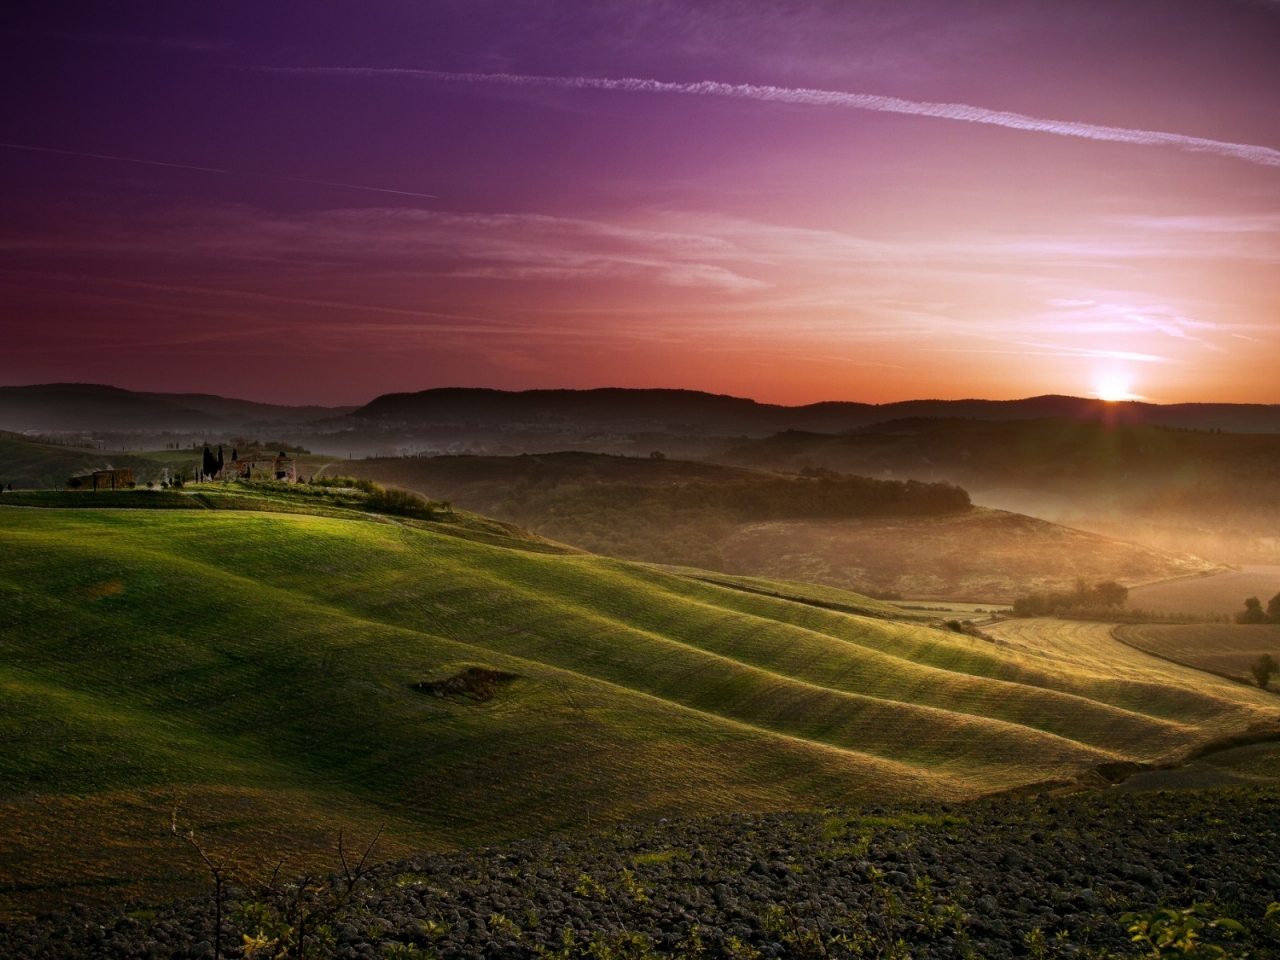 Sunset in Tuscany for 1280 x 960 resolution